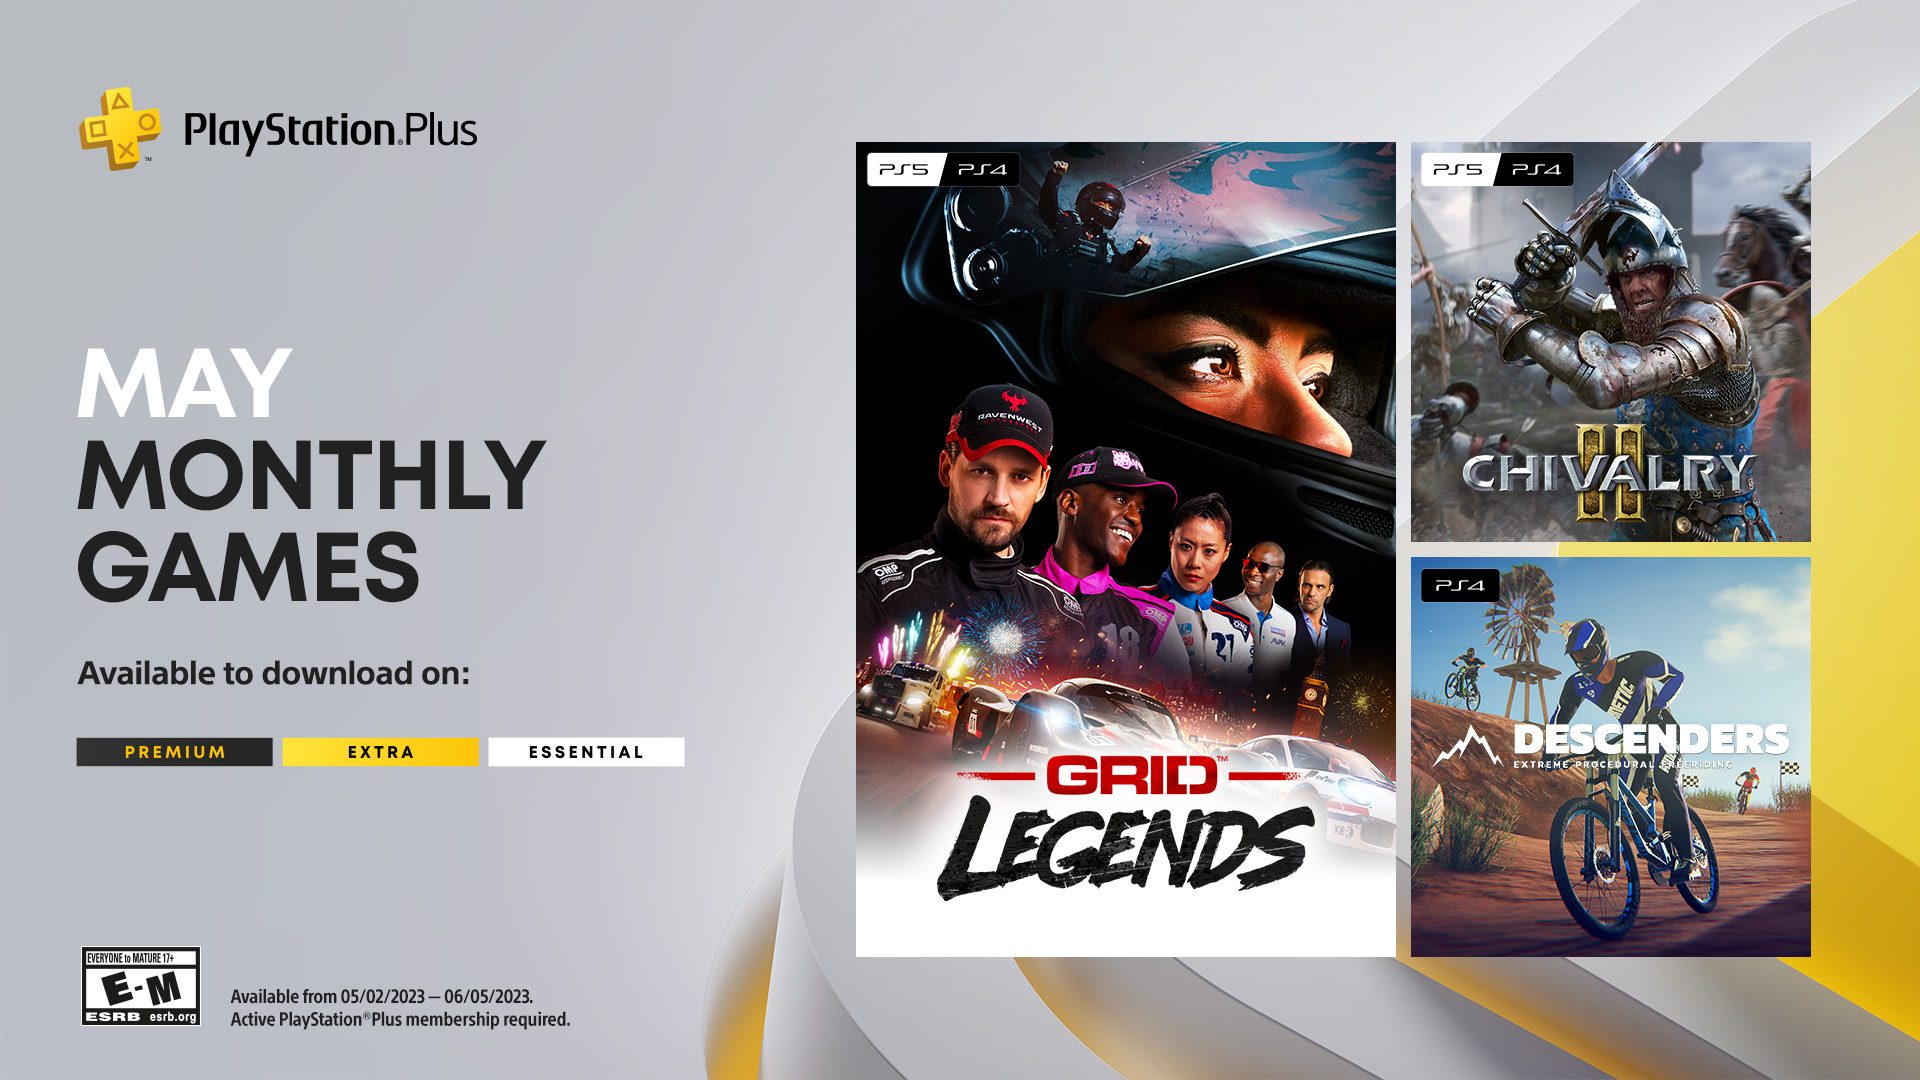 3Bc0C92664B681E28F3C7Be6359057B4De960F3D Playstation Plus Monthly Games For May: Grid Legends, Chivalry 2